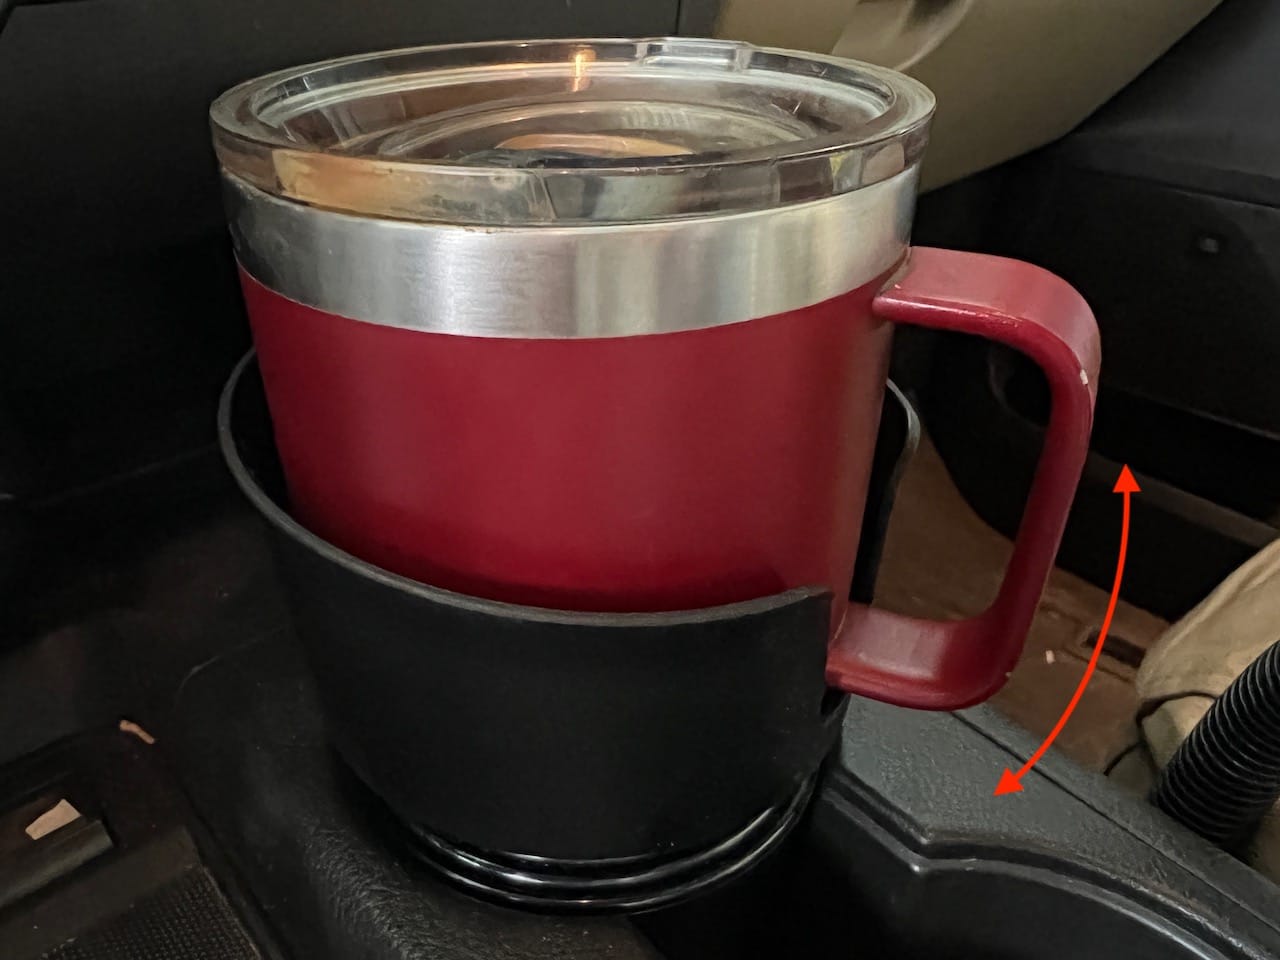 The CupCoffee swivels back and forth to allow for perfect adjustment in your vehicle.